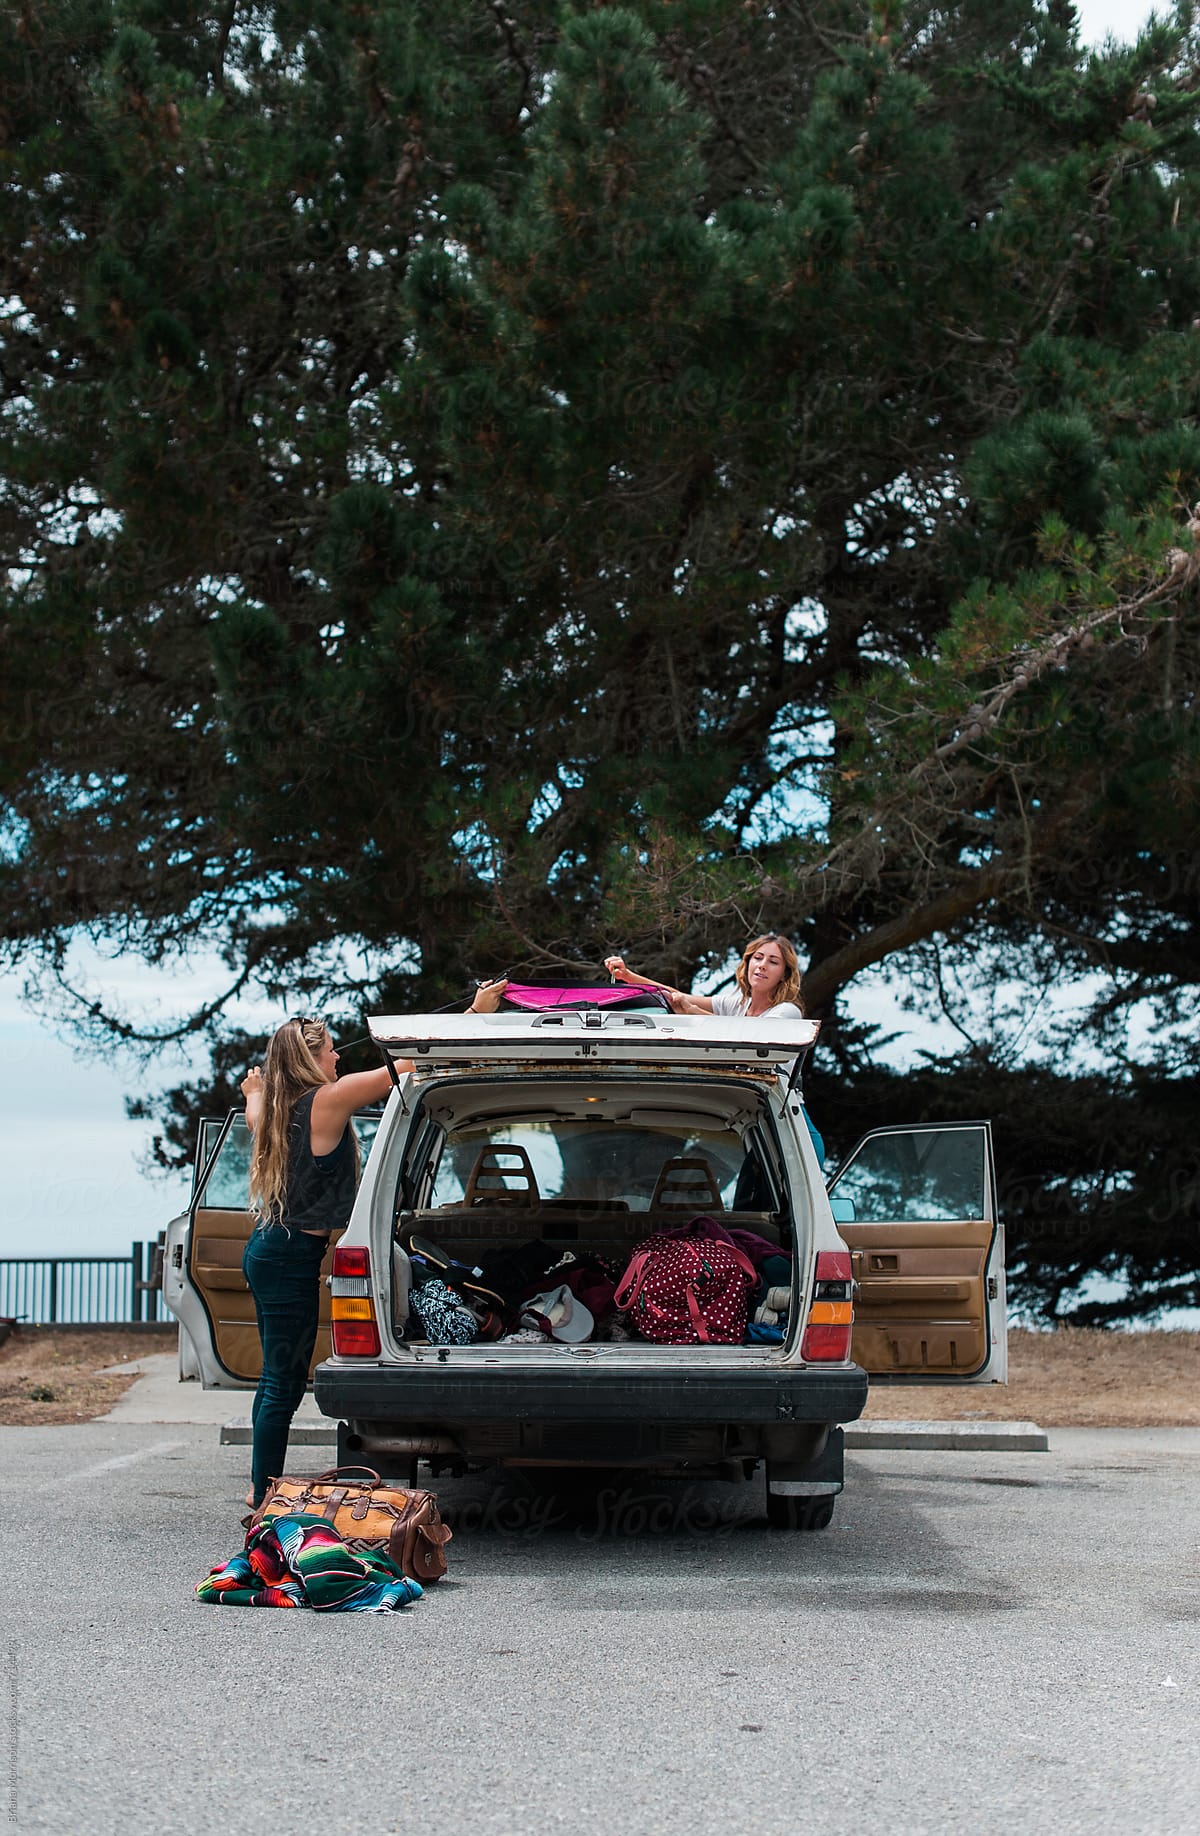 Two Young Women Unloading Surfboards from an old White Car